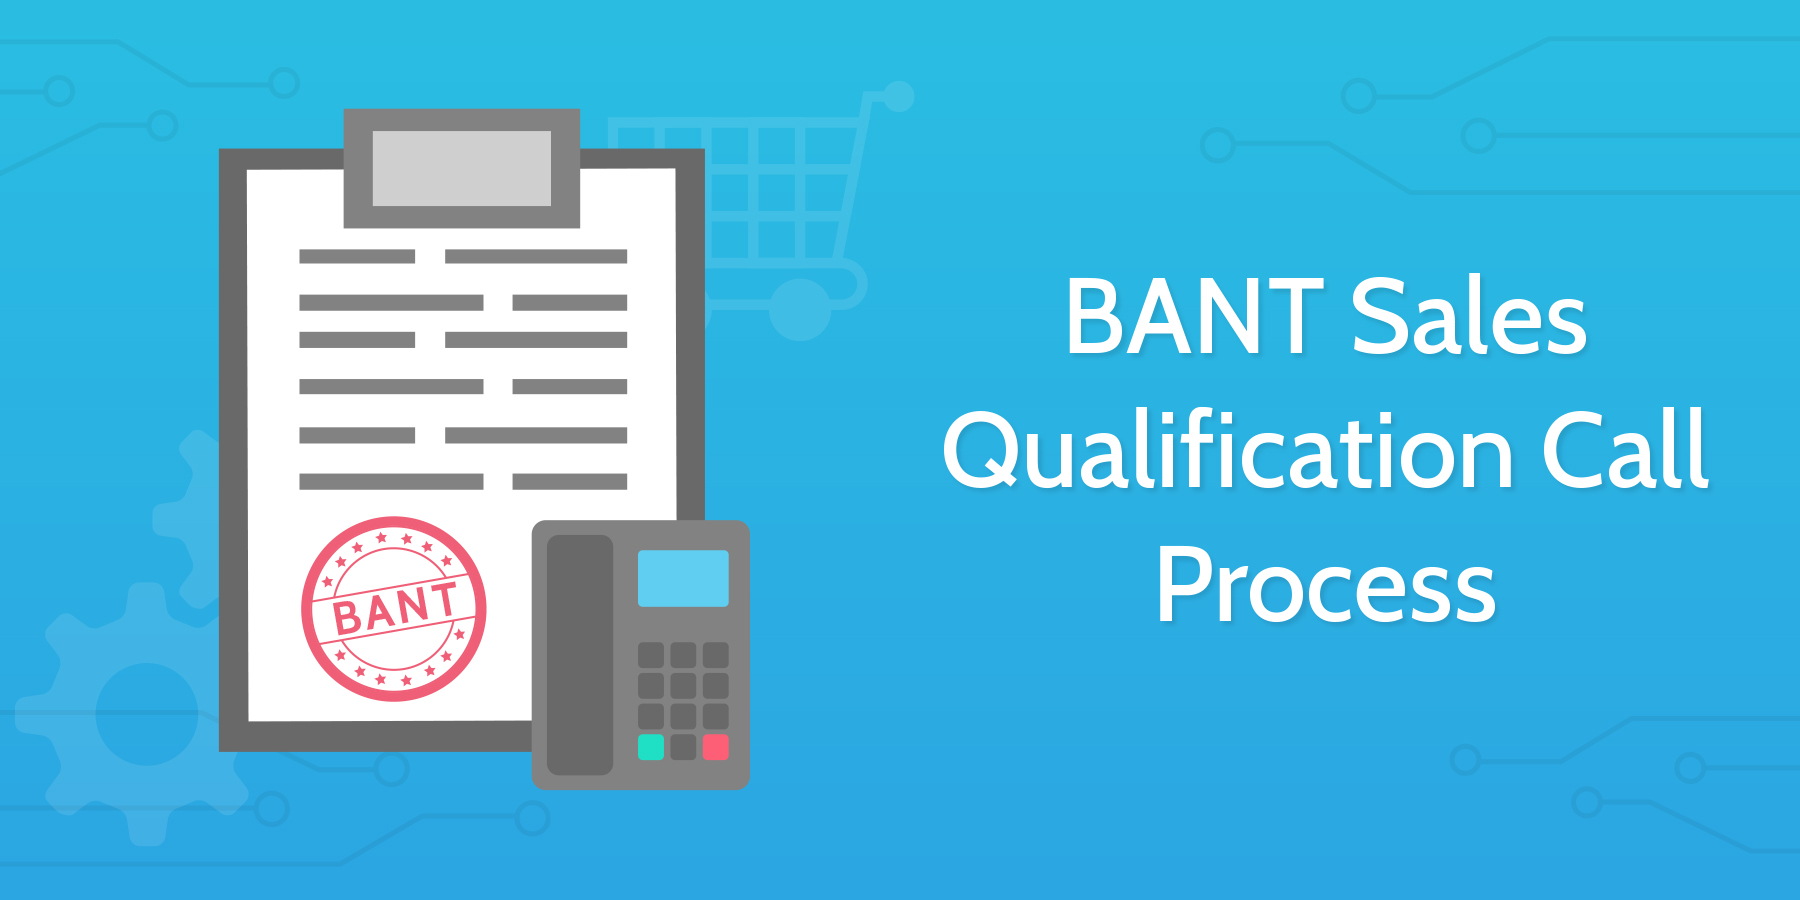 bant-sales-qualification-call-process